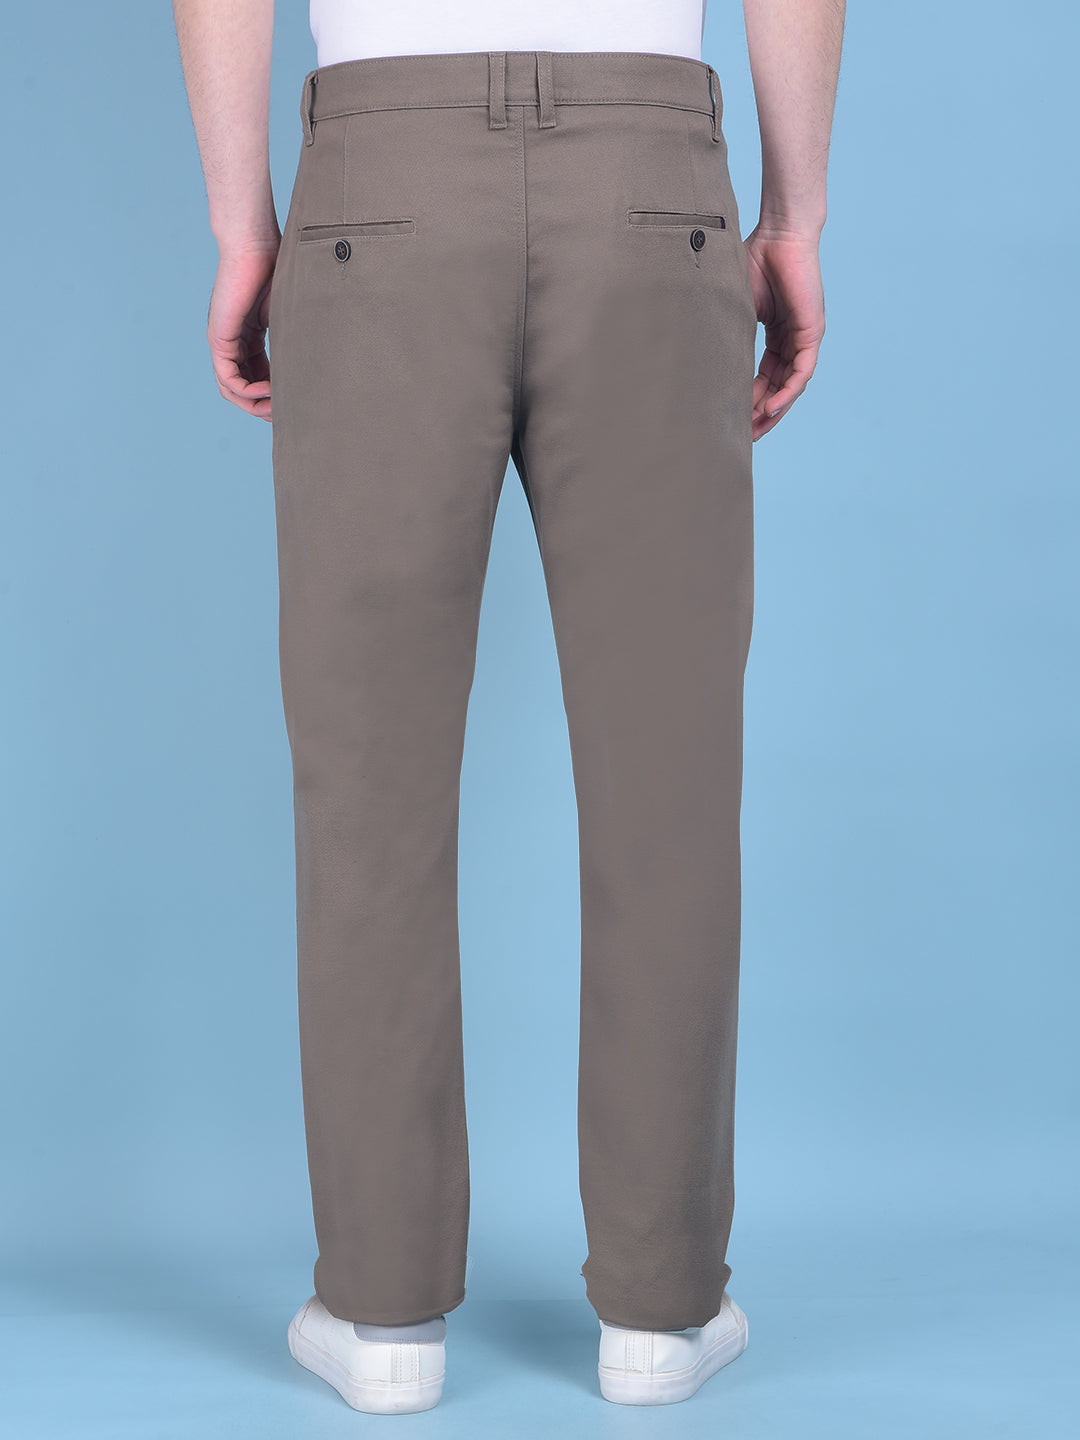 Brown Chinos Trousers-Men Trousers-Crimsoune Club